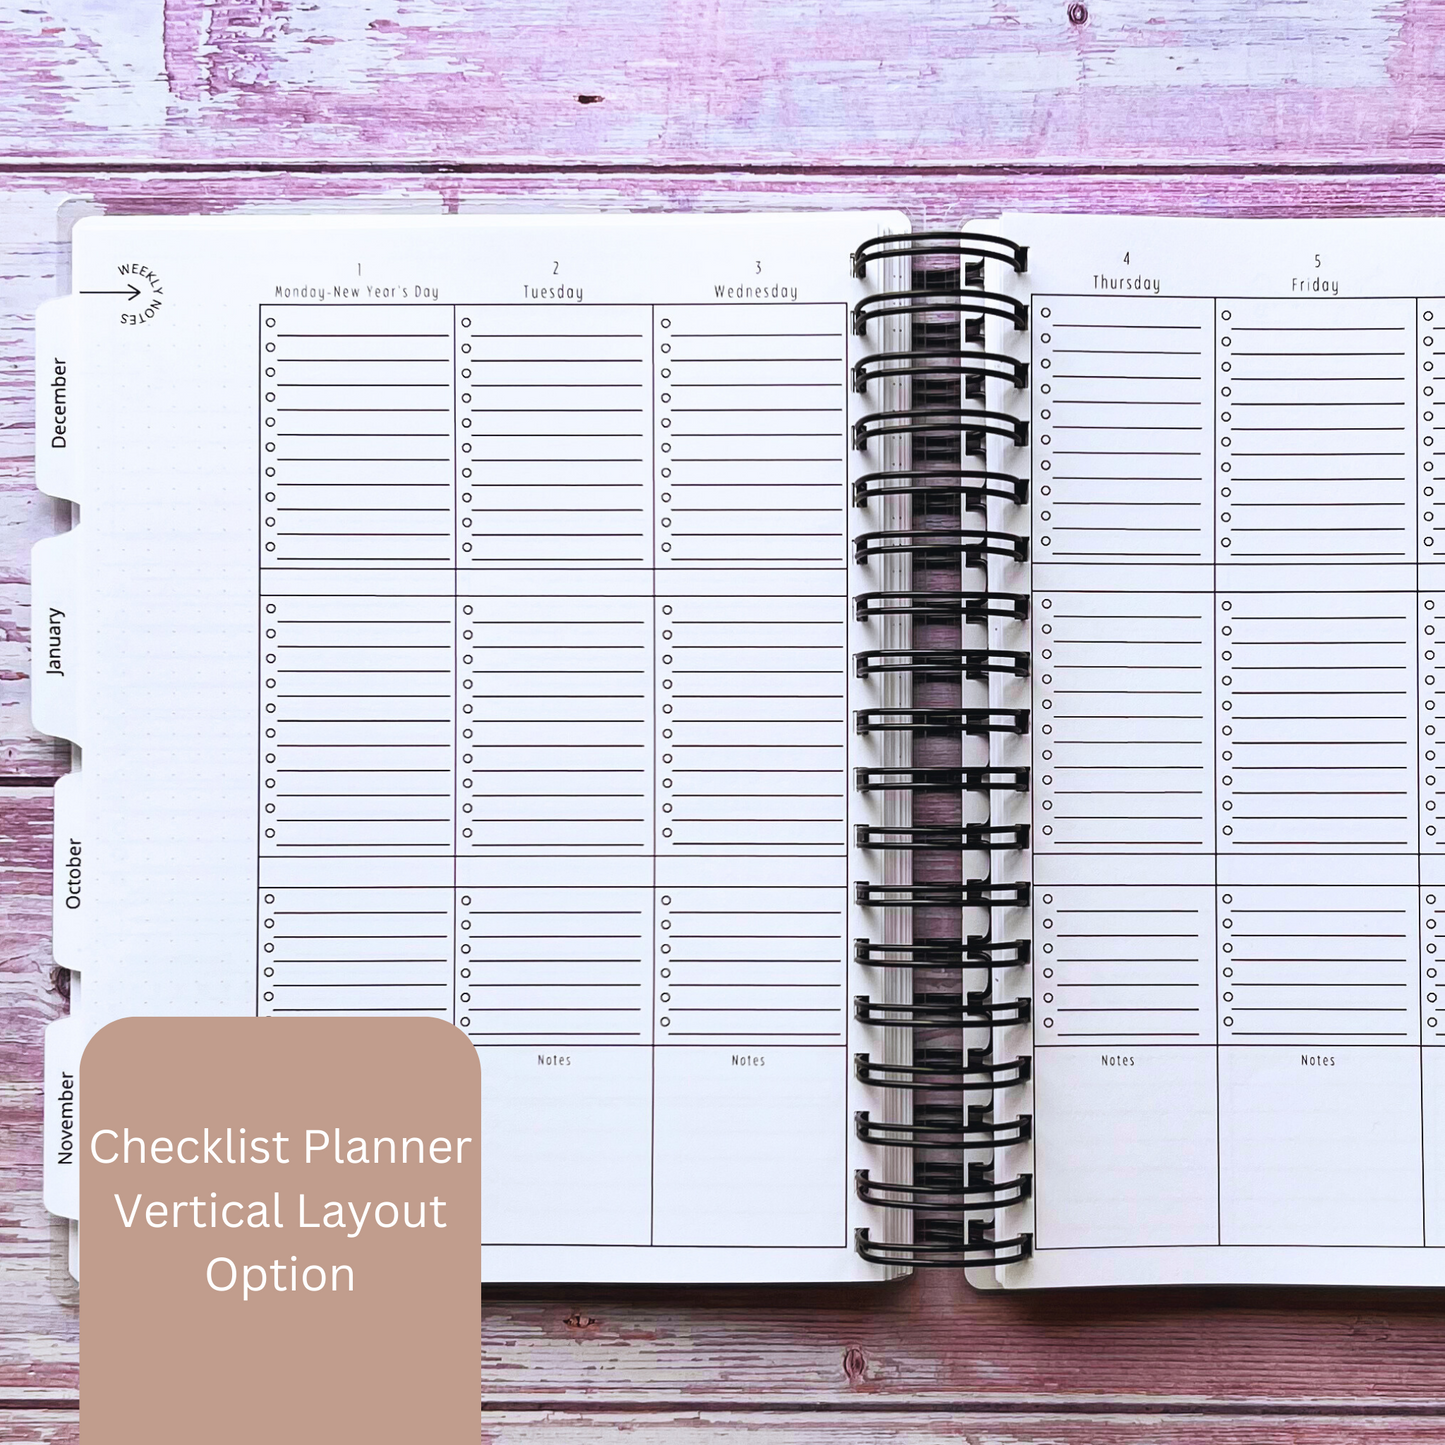 Bohemian Floral Skull Personalized Planner